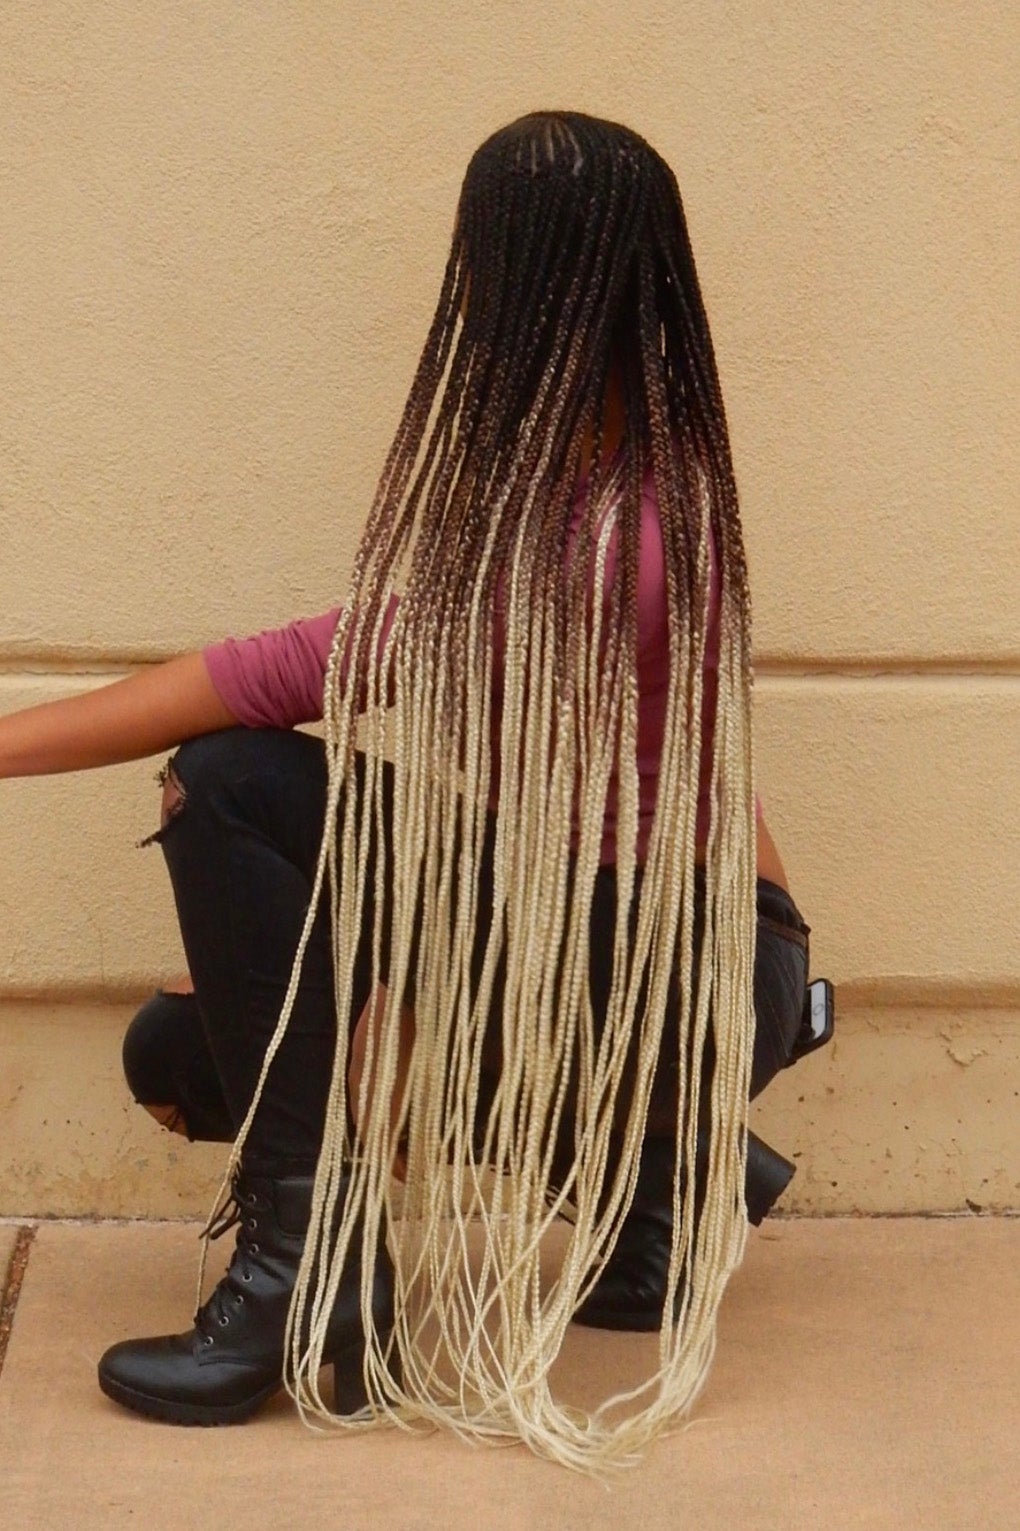 Amazing Ombre Braids Like You've Never Seen Them Before
